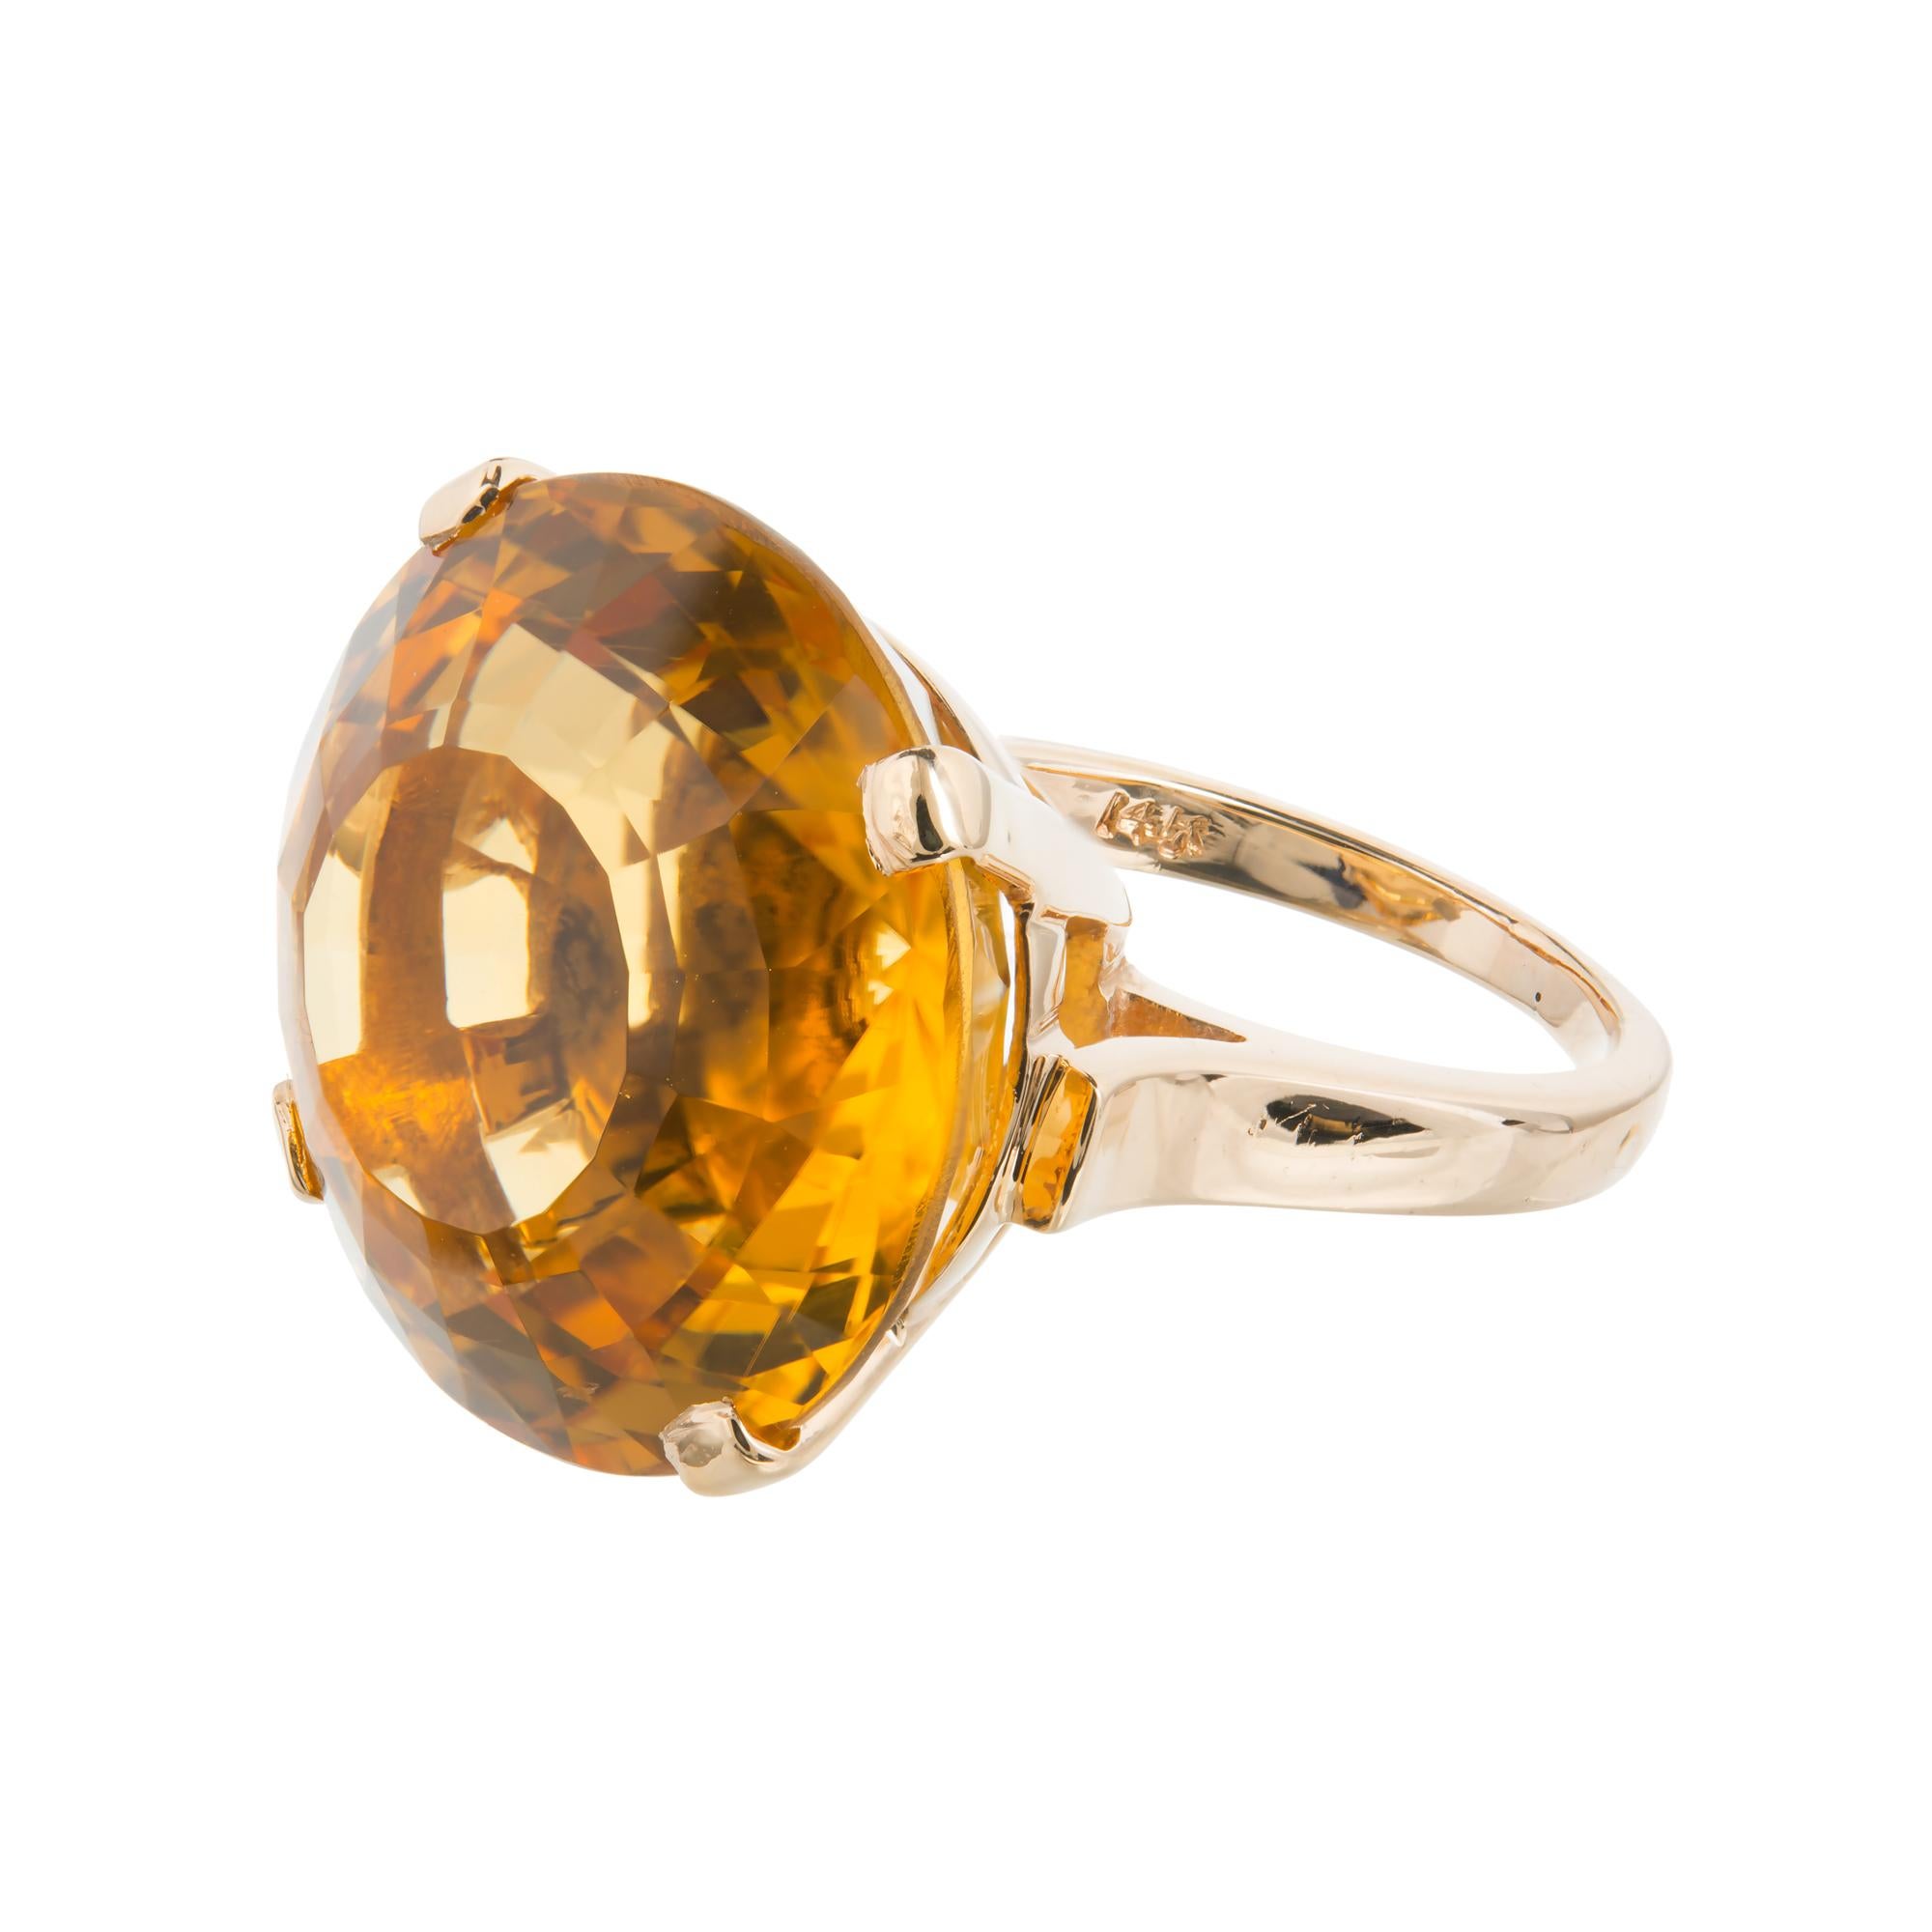 20.00ct. golden yellow Citrines cocktail ring. Extremely well-polished with raised crown and small table.

1 round golden yellow with a hint of orange top gem Citrine, approx. total weight 20.00cts, VS, 20.4mm, natural color no enhancements
Size 6